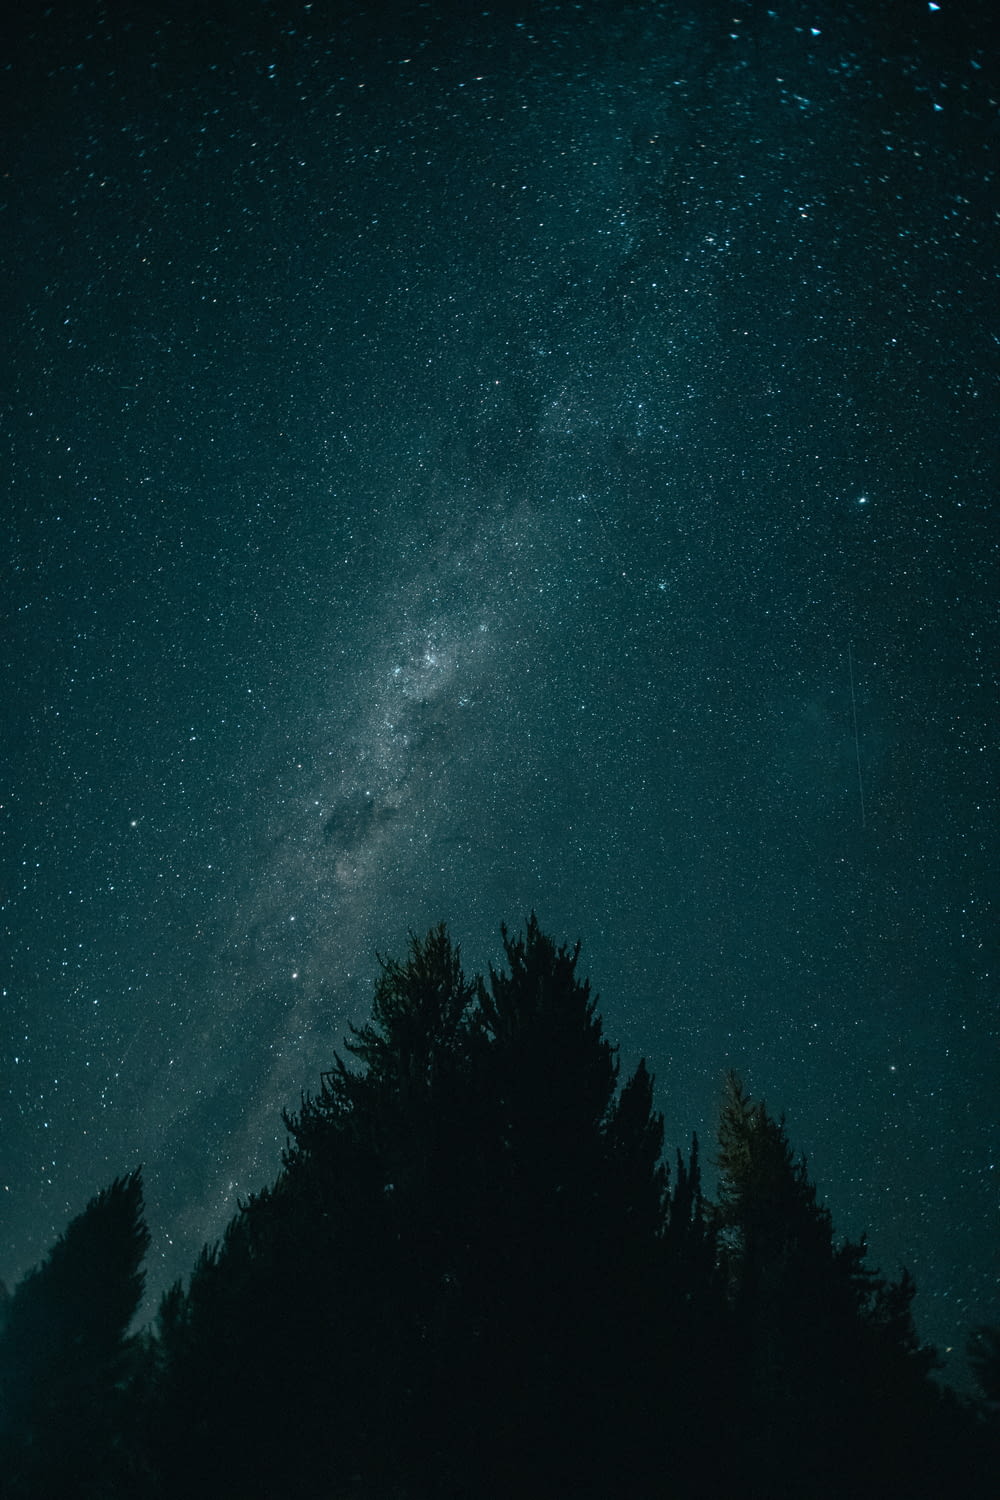 the night sky with a lot of stars and trees